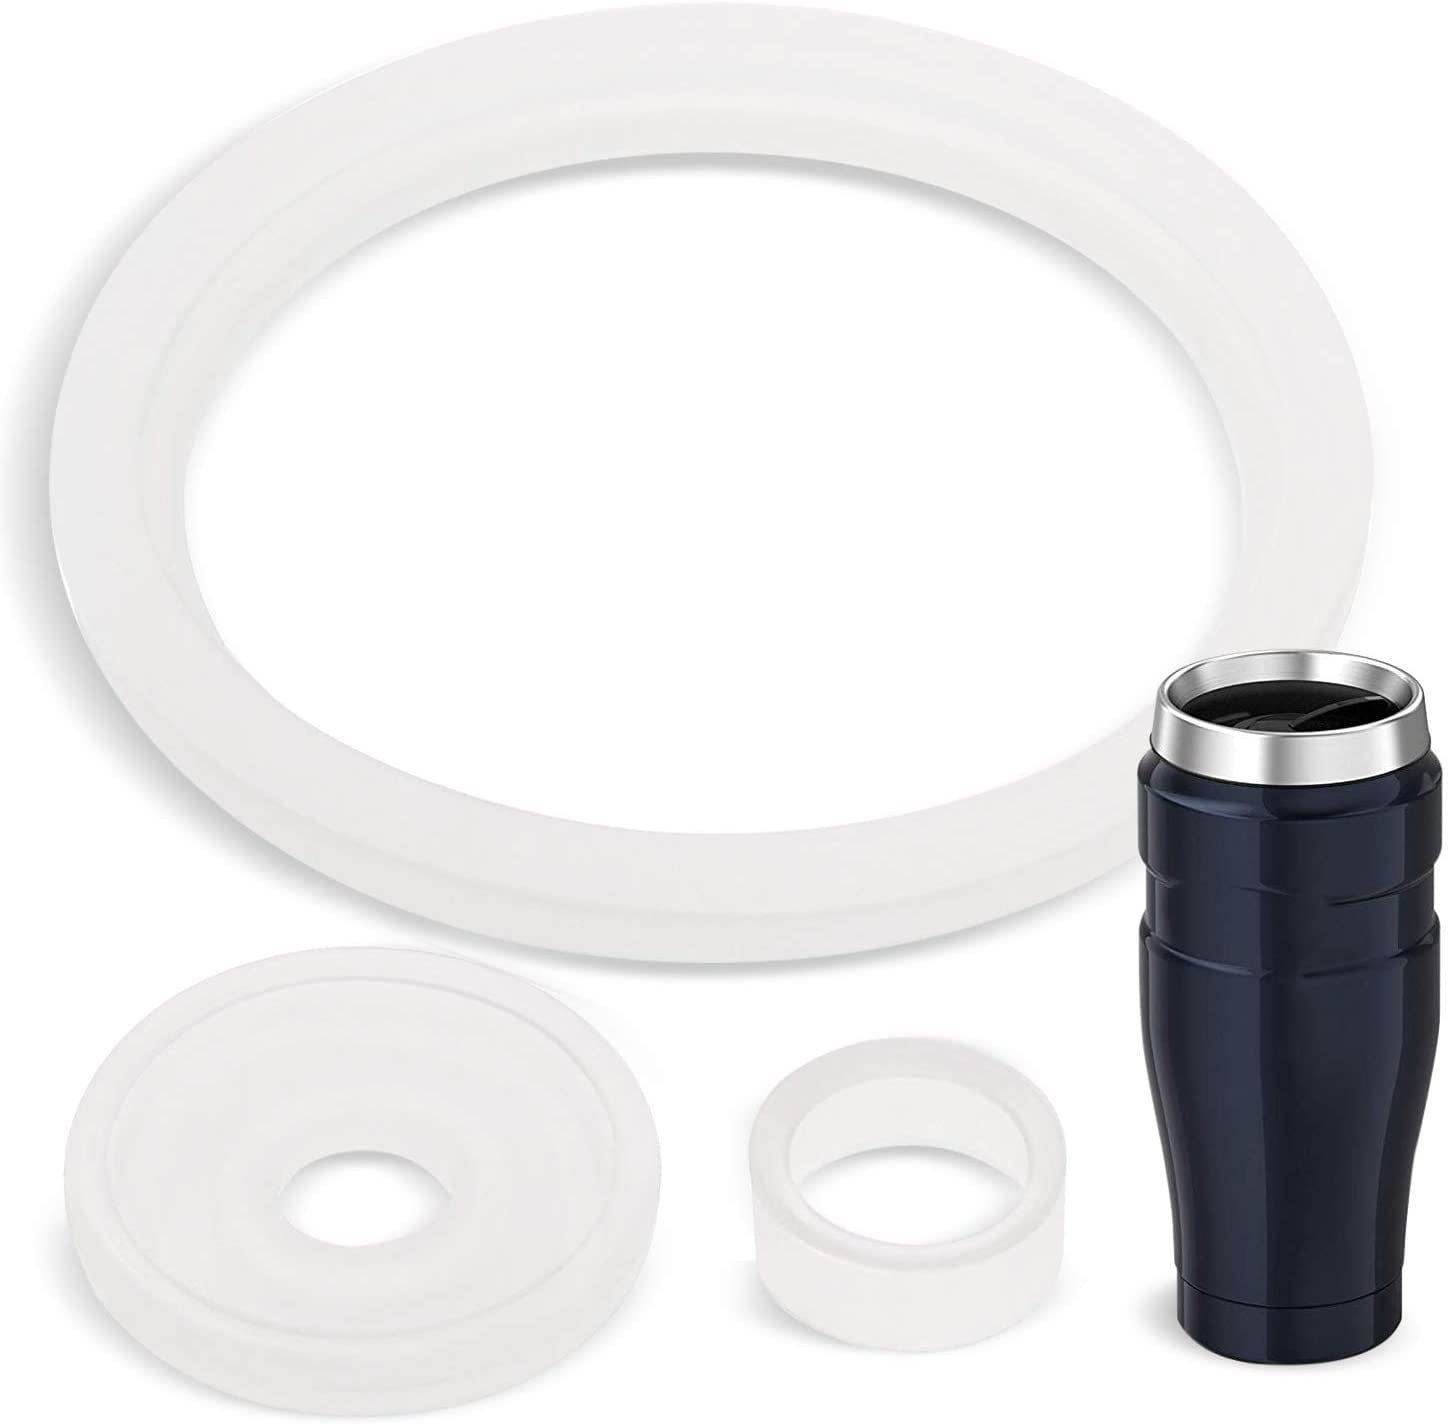  LUAATT Thermos Replacement Seal Ring,2 Pack